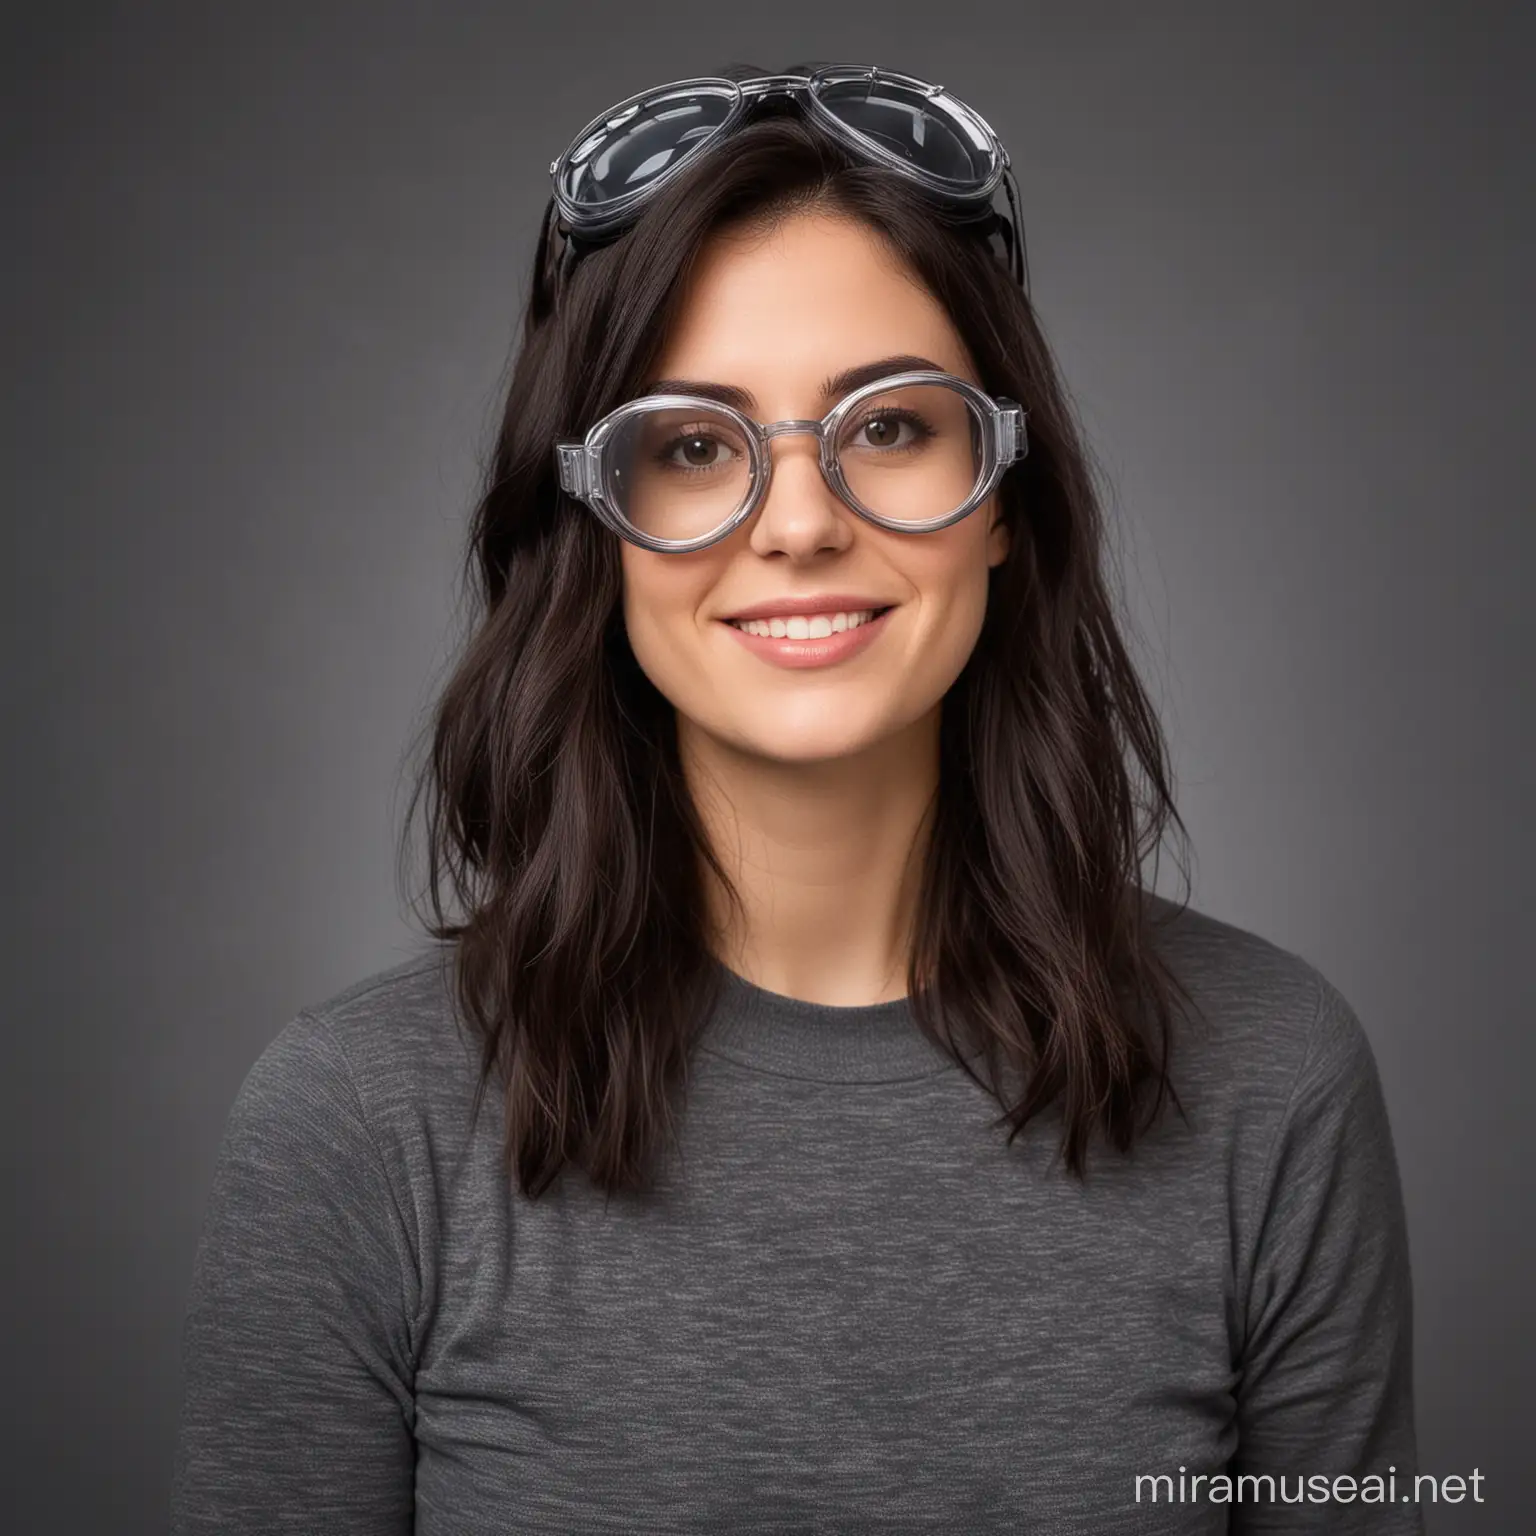 Profile image of a copywriter based in Canada who is dressed in casual and has a dark hair and wearing a pair of goggles 